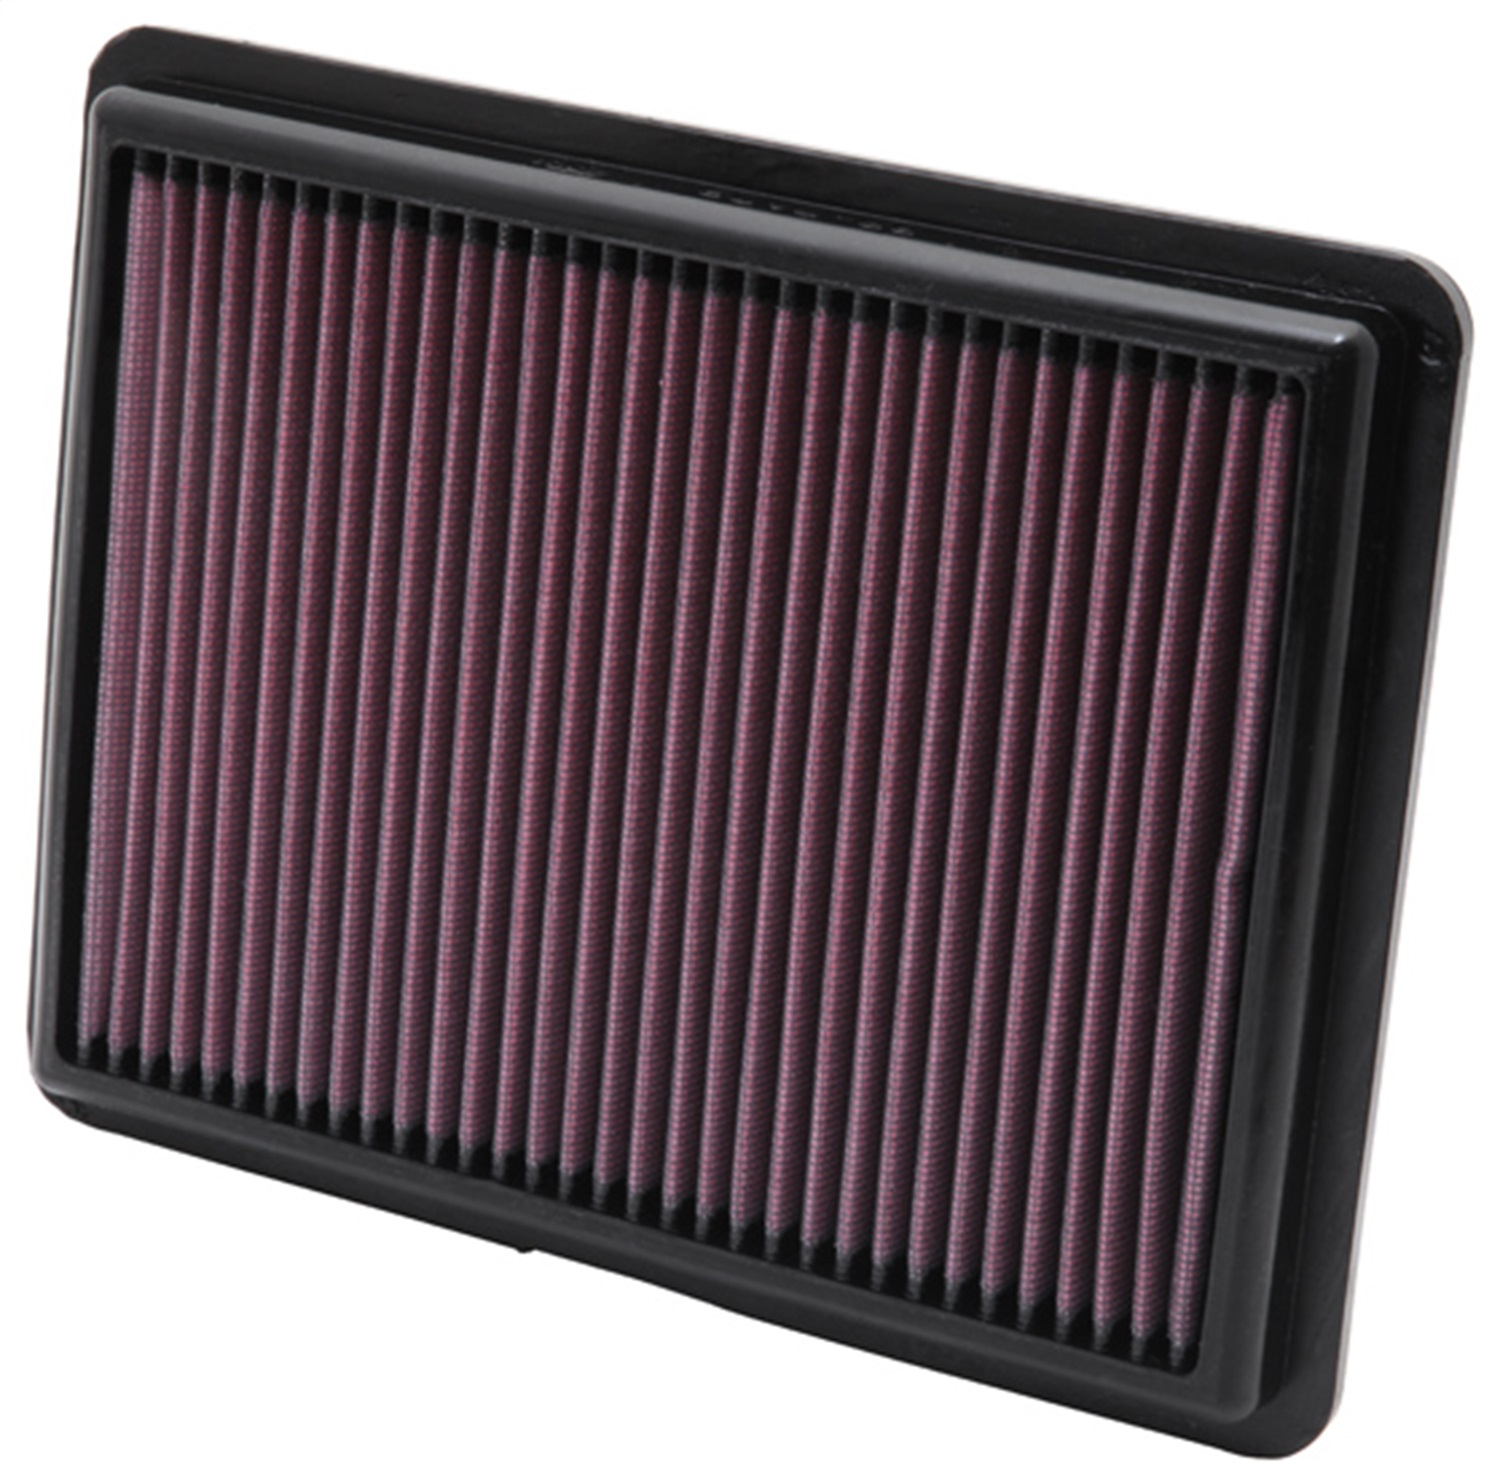 K&N Filters K&N Filters 33-2403 Air Filter Fits Accord Accord Crosstour Crosstour TL TSX